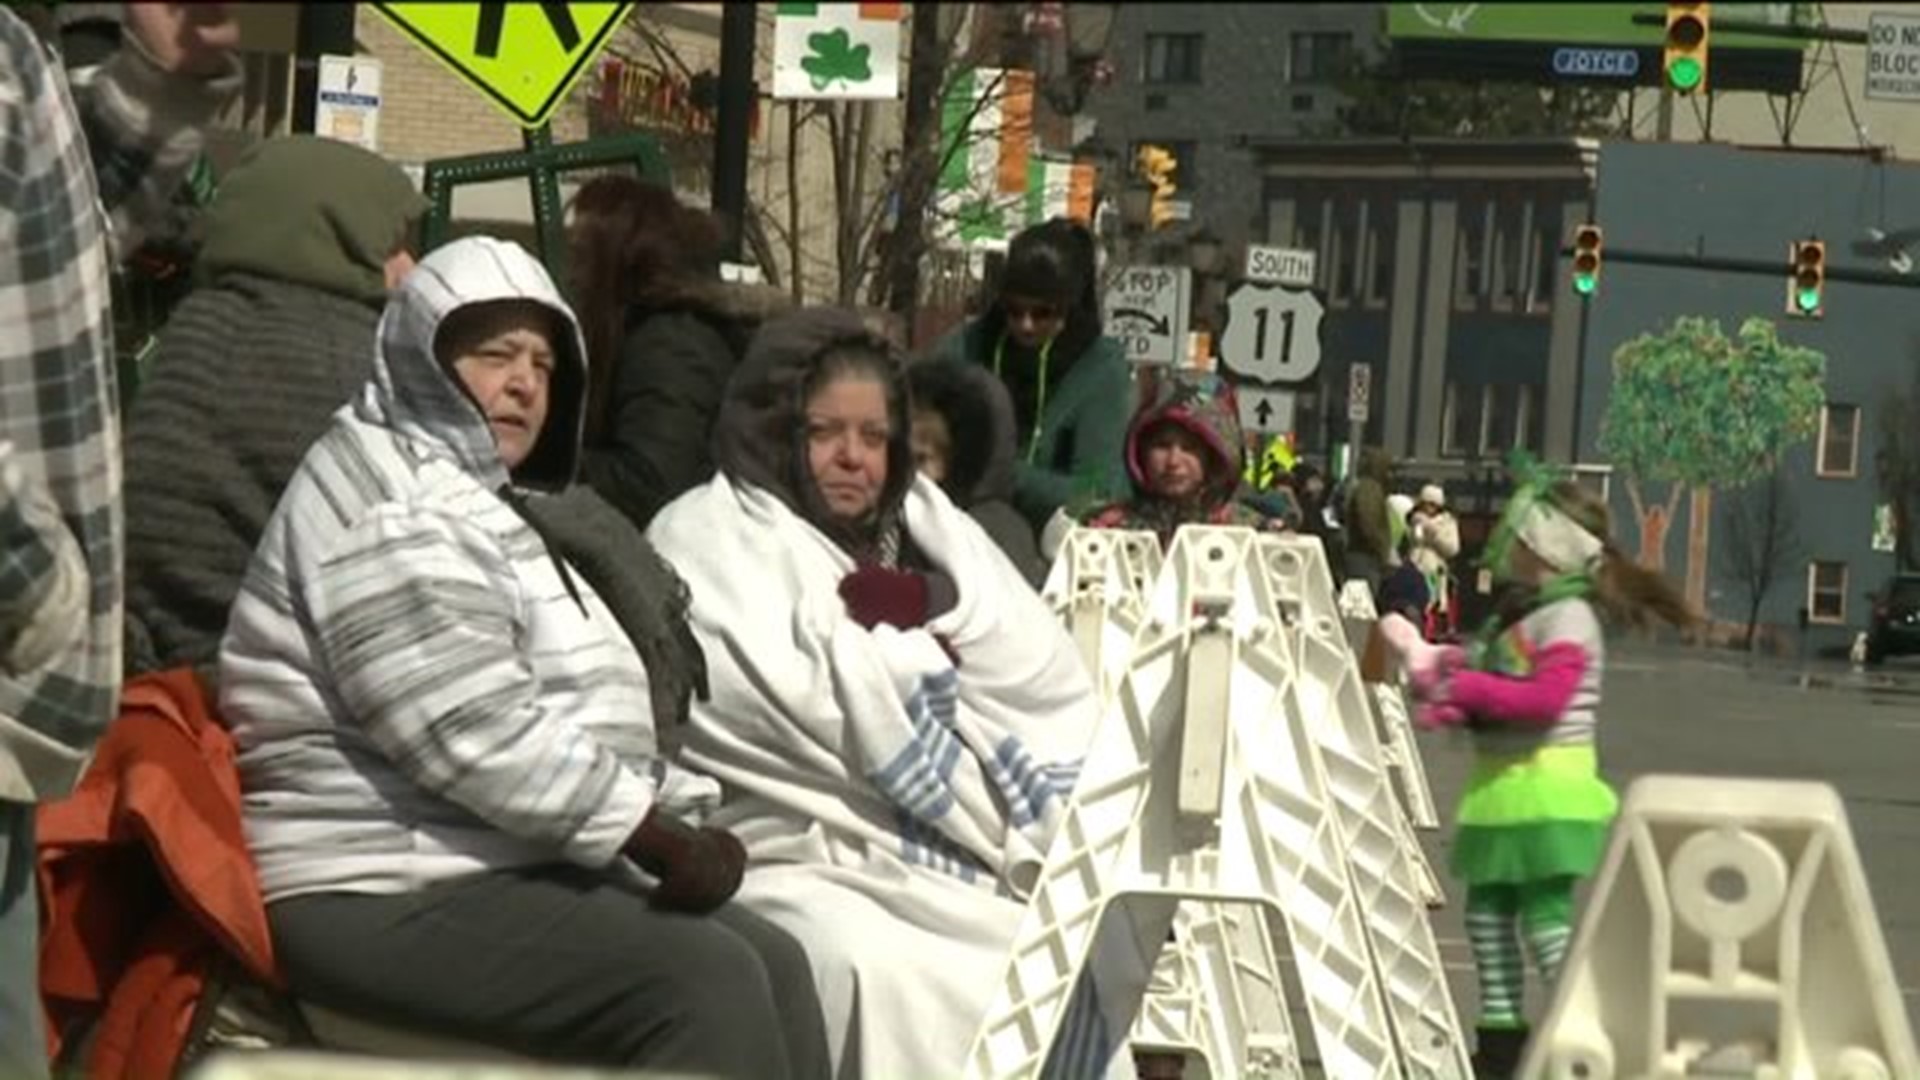 Shivering Shamrocks! Parade Season Steps Off with Chilly Temps